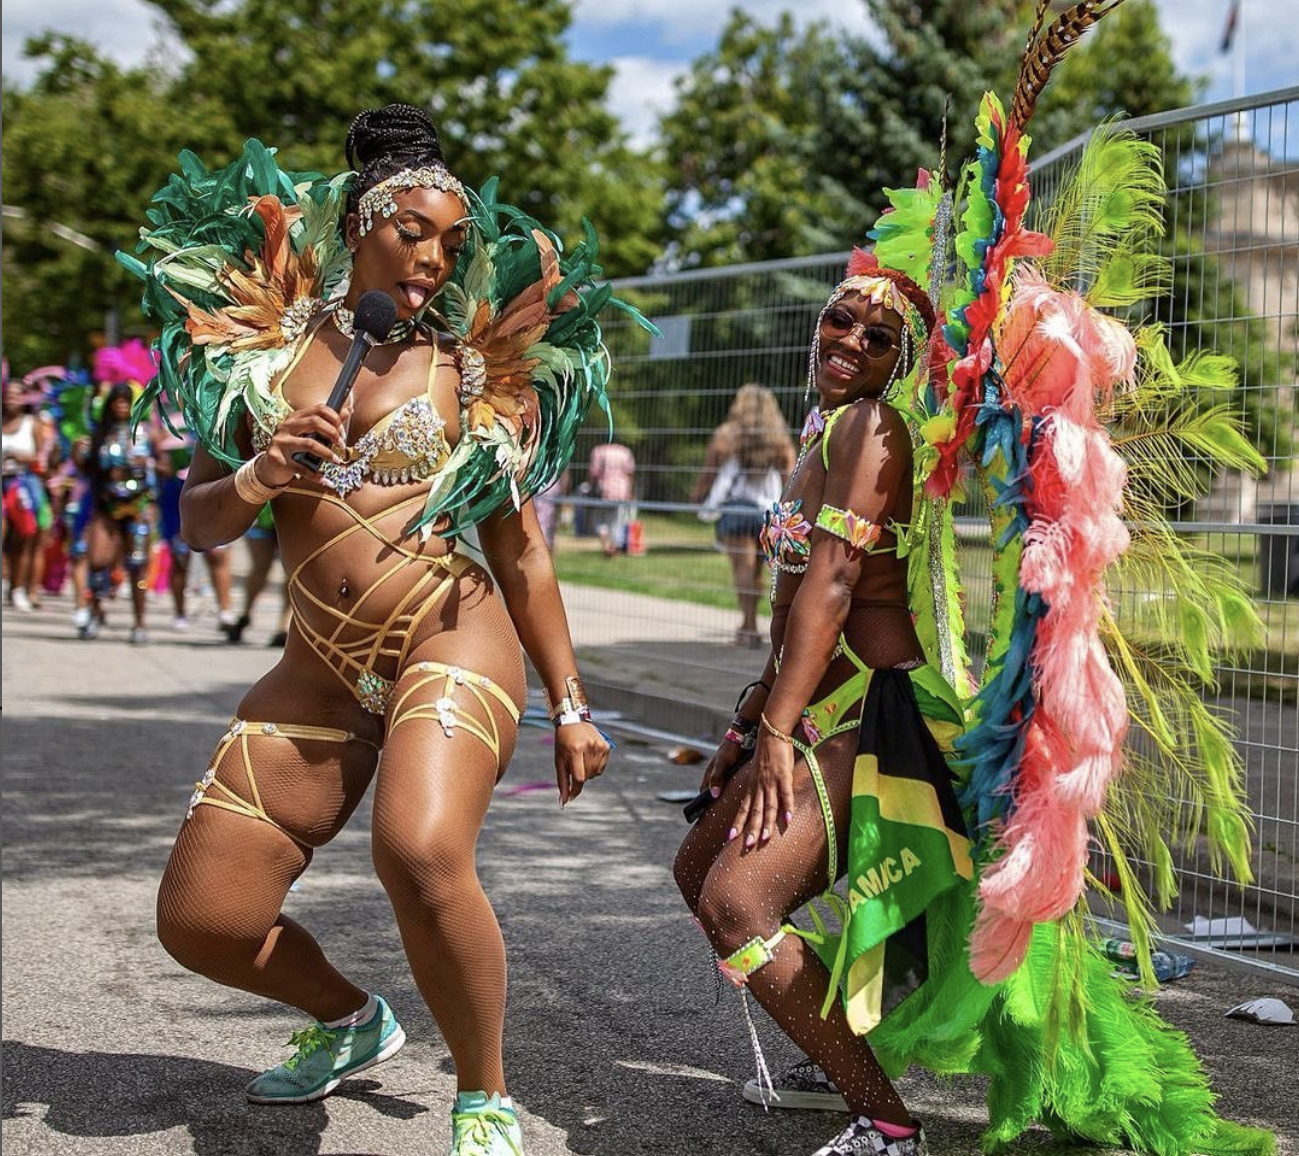 Two Sunlime Mas masqueraders at the 2022 Toronto Caribbean Carnival. One masquerader is dawning a green feathered costume while interviewing a second female masquerader dawning a large yellow feathered frontline costume.